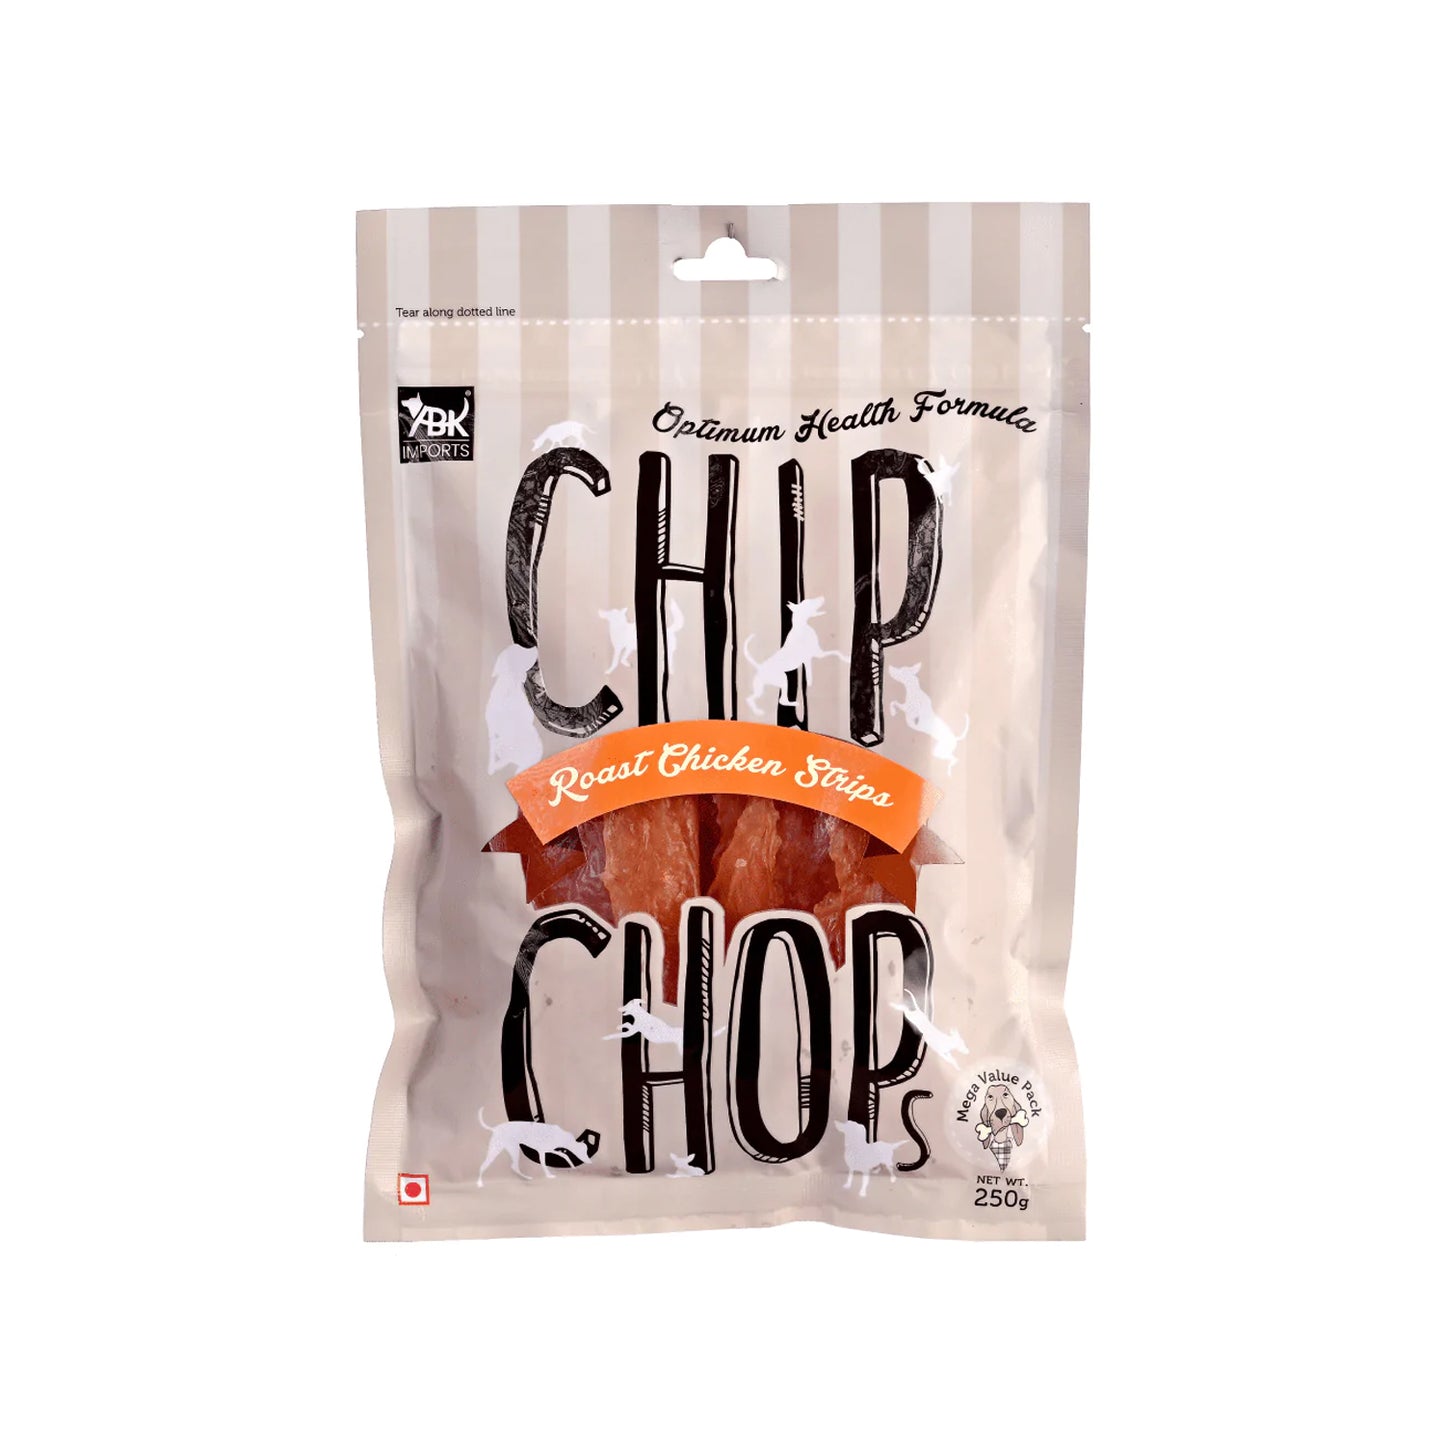 Chip Chops - Roast Chicken Strips For Dogs